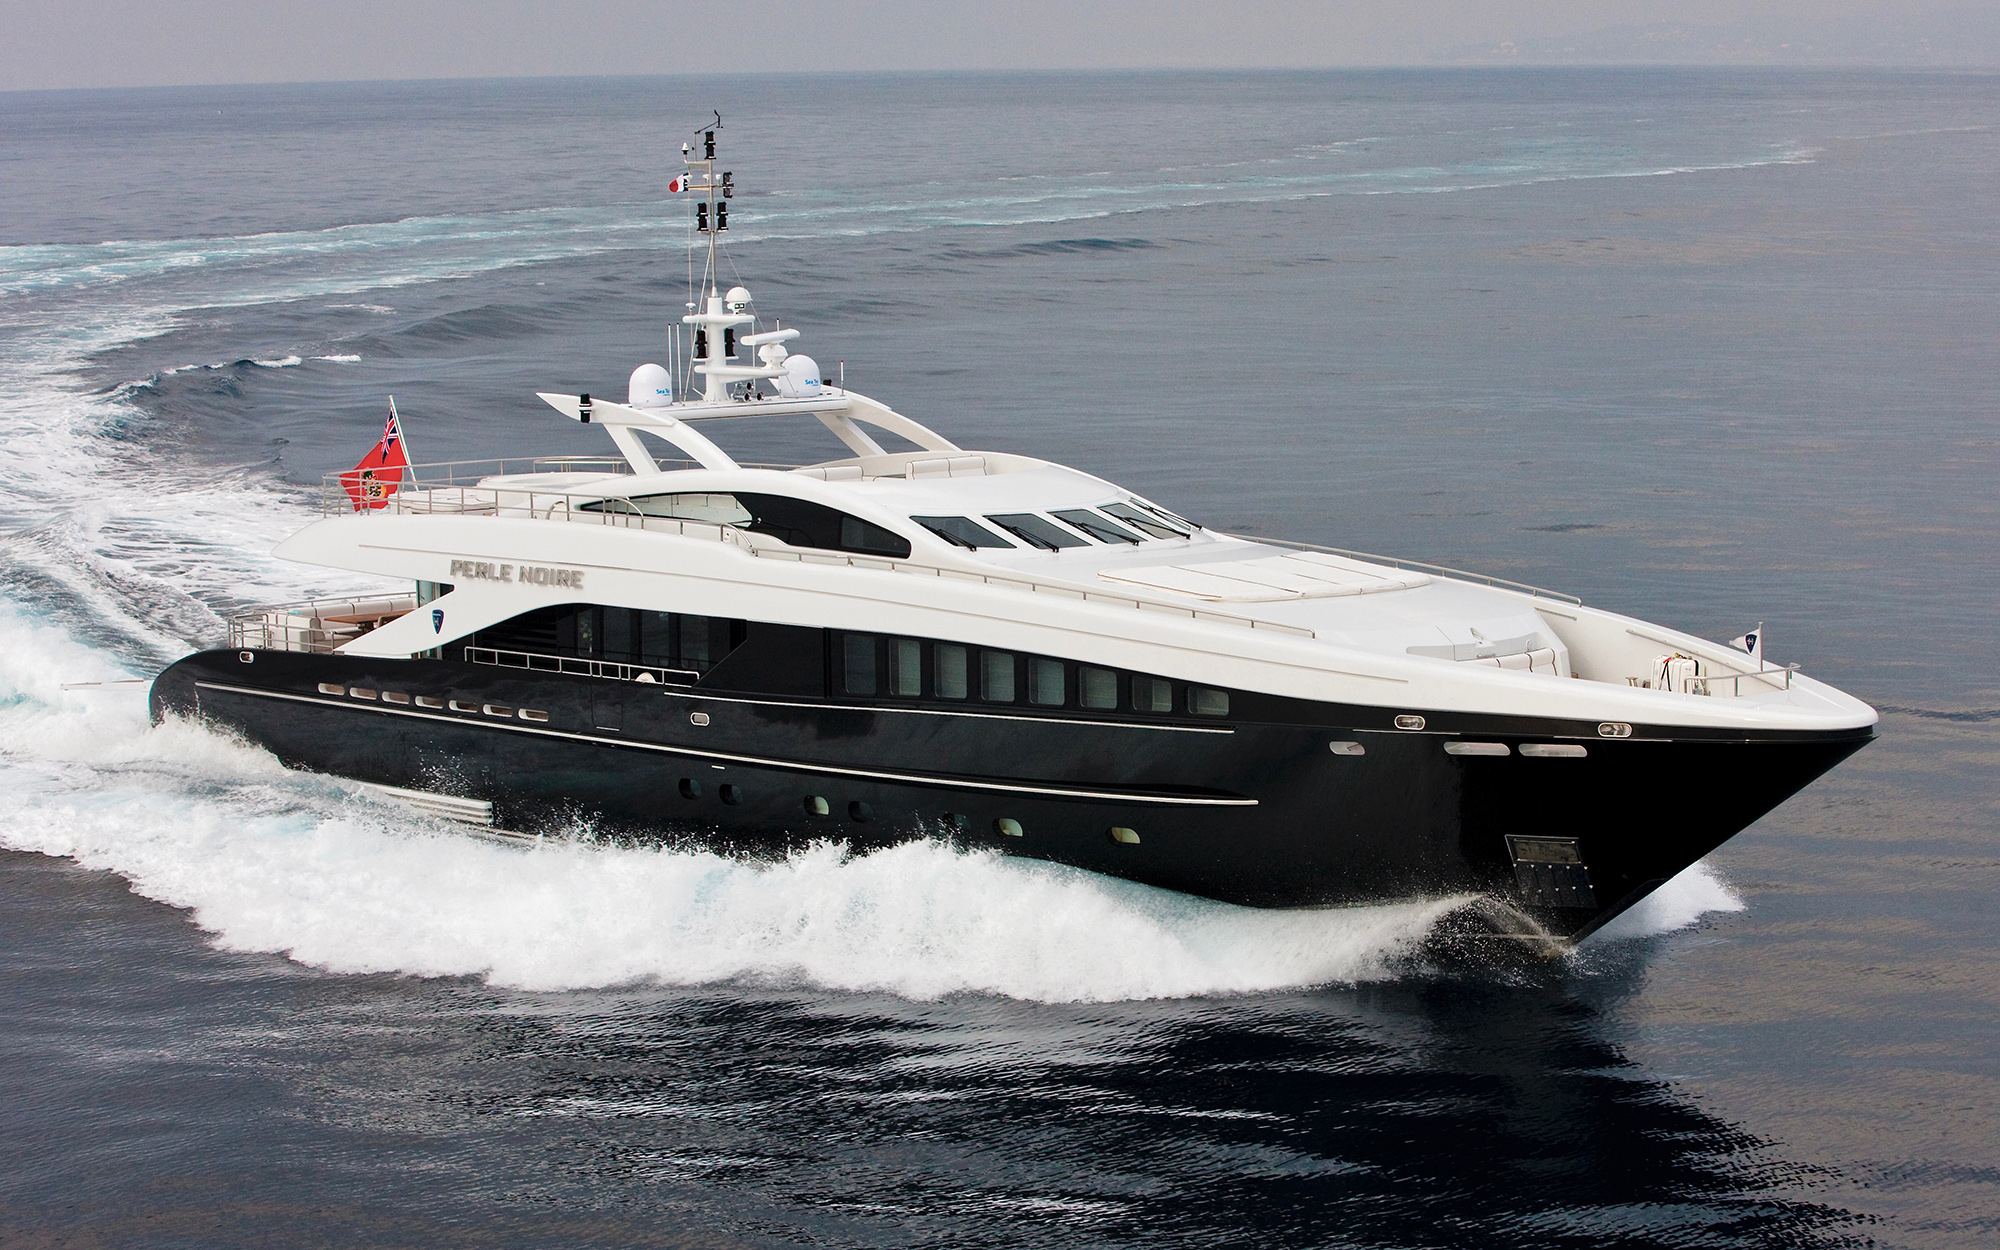 PERLE NOIRE charter specs and number of guests